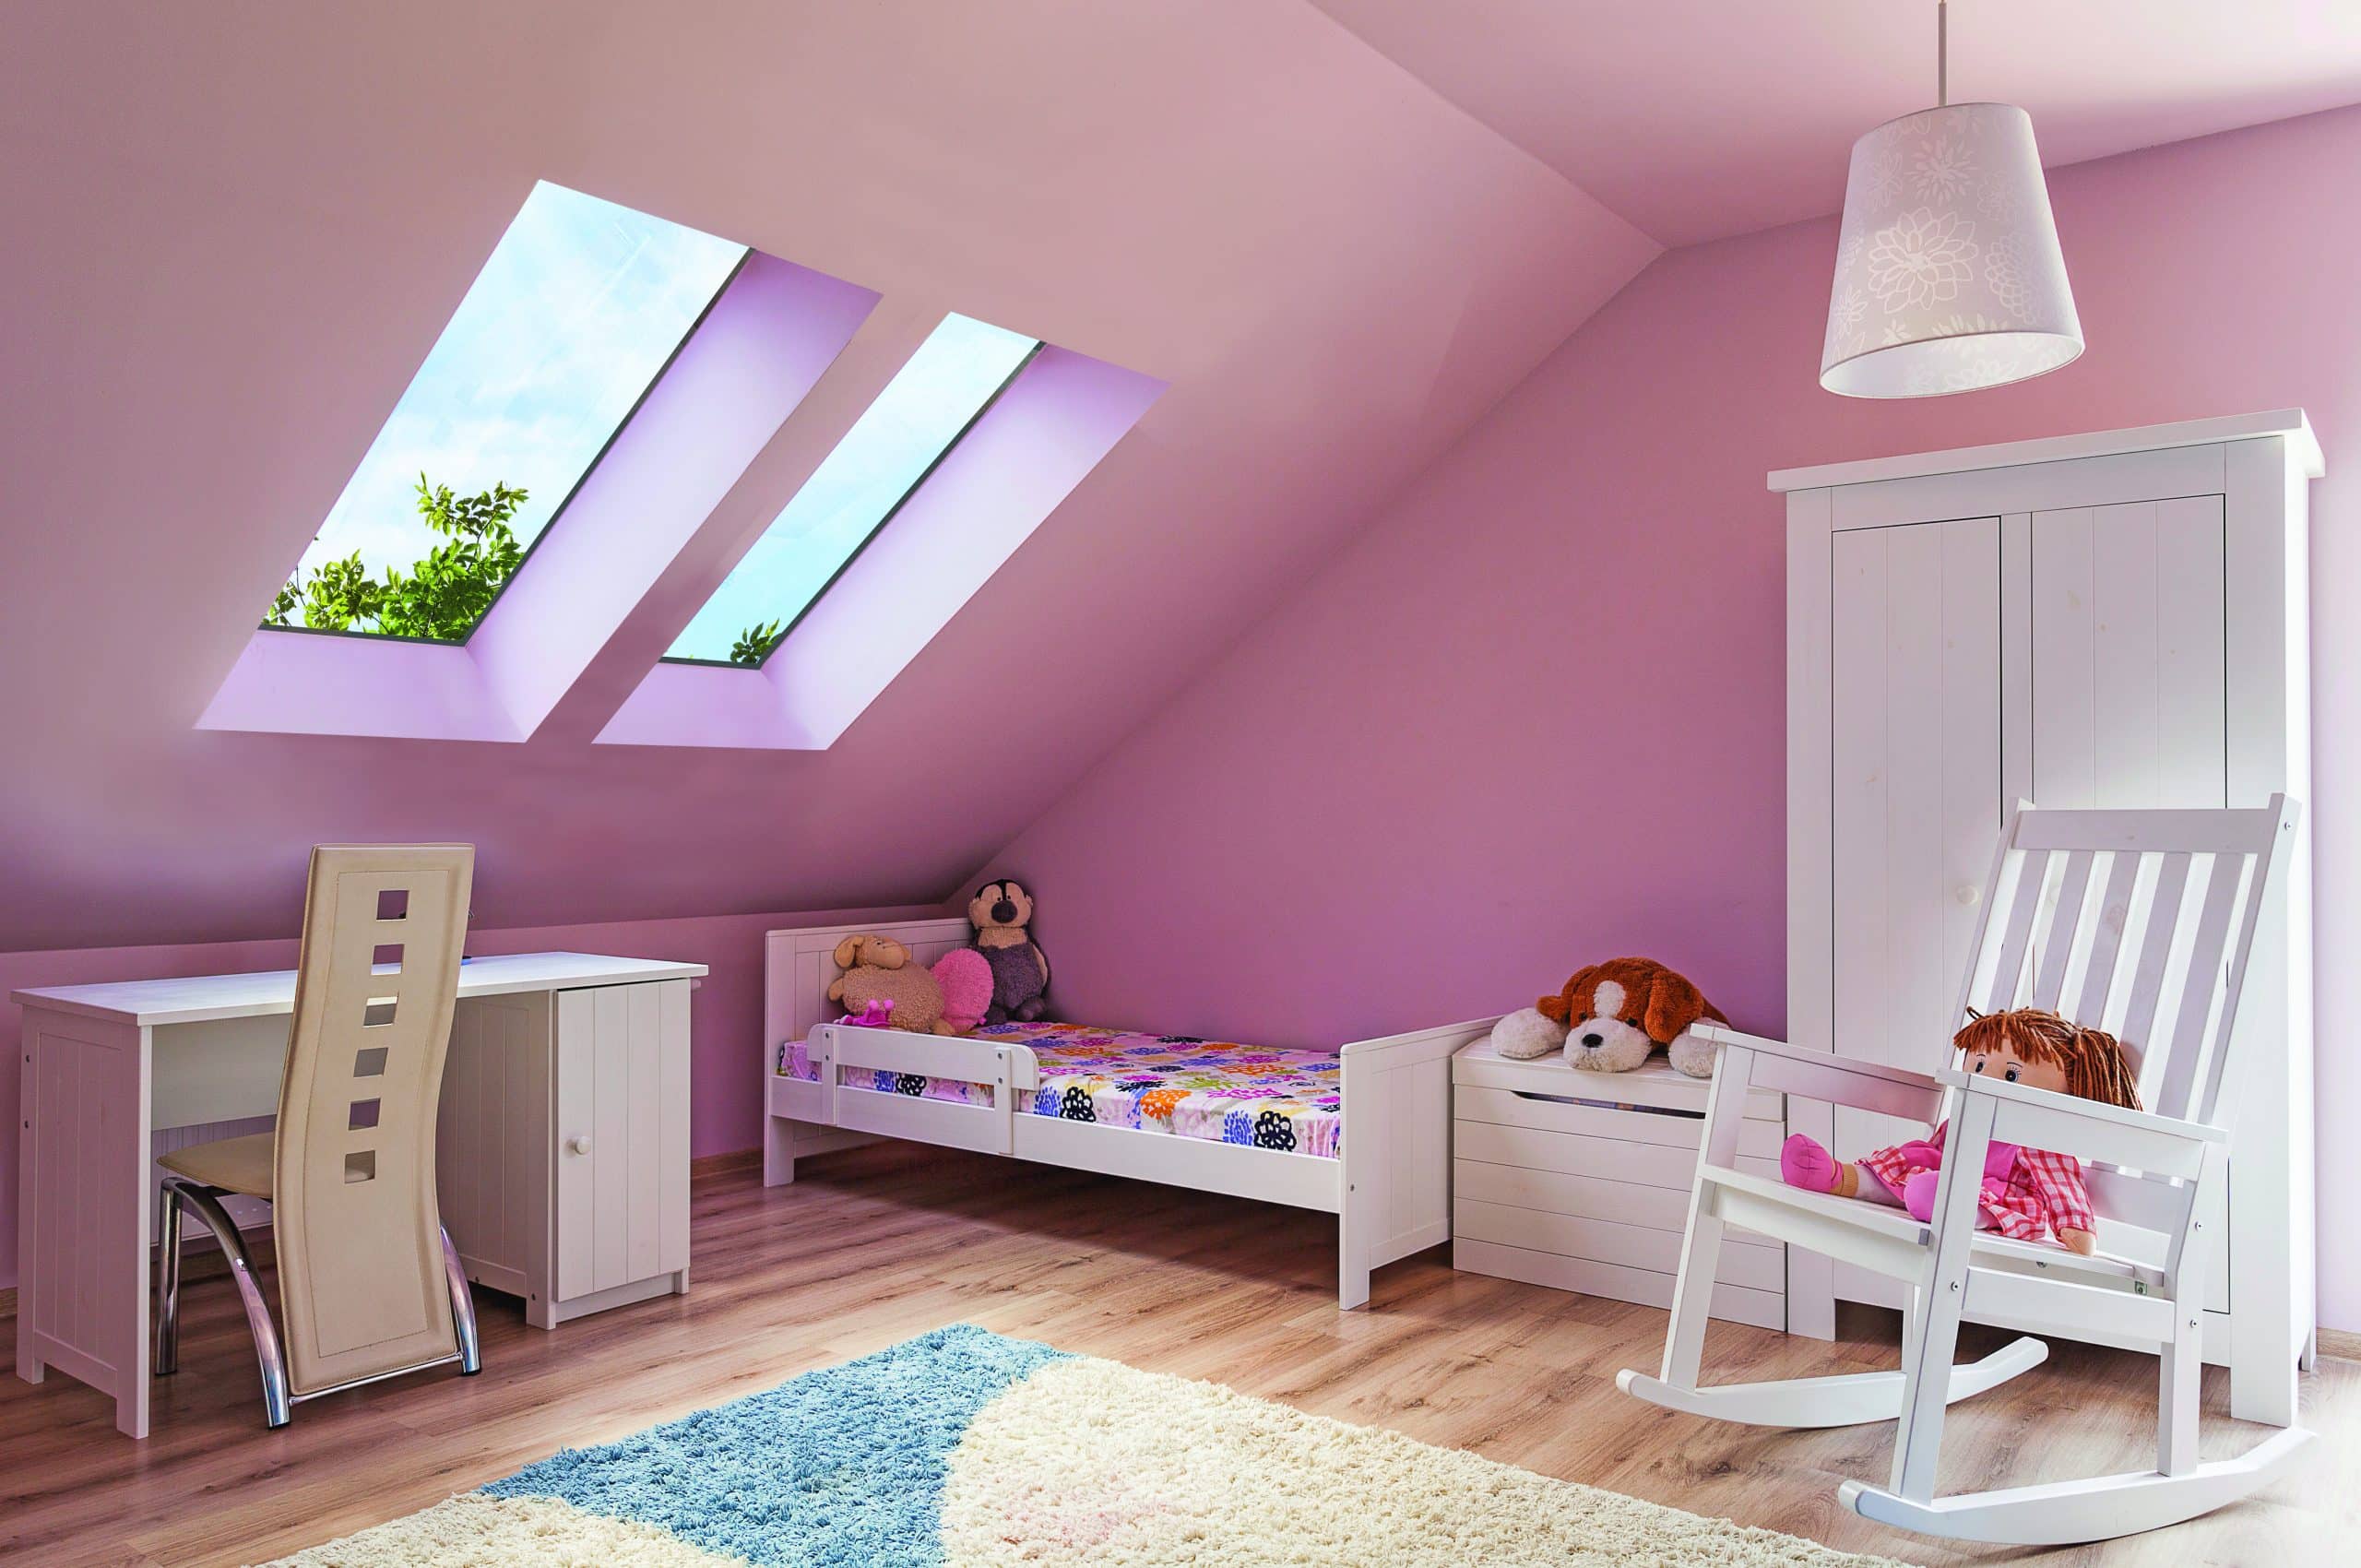 Pink room with pitched rooflights